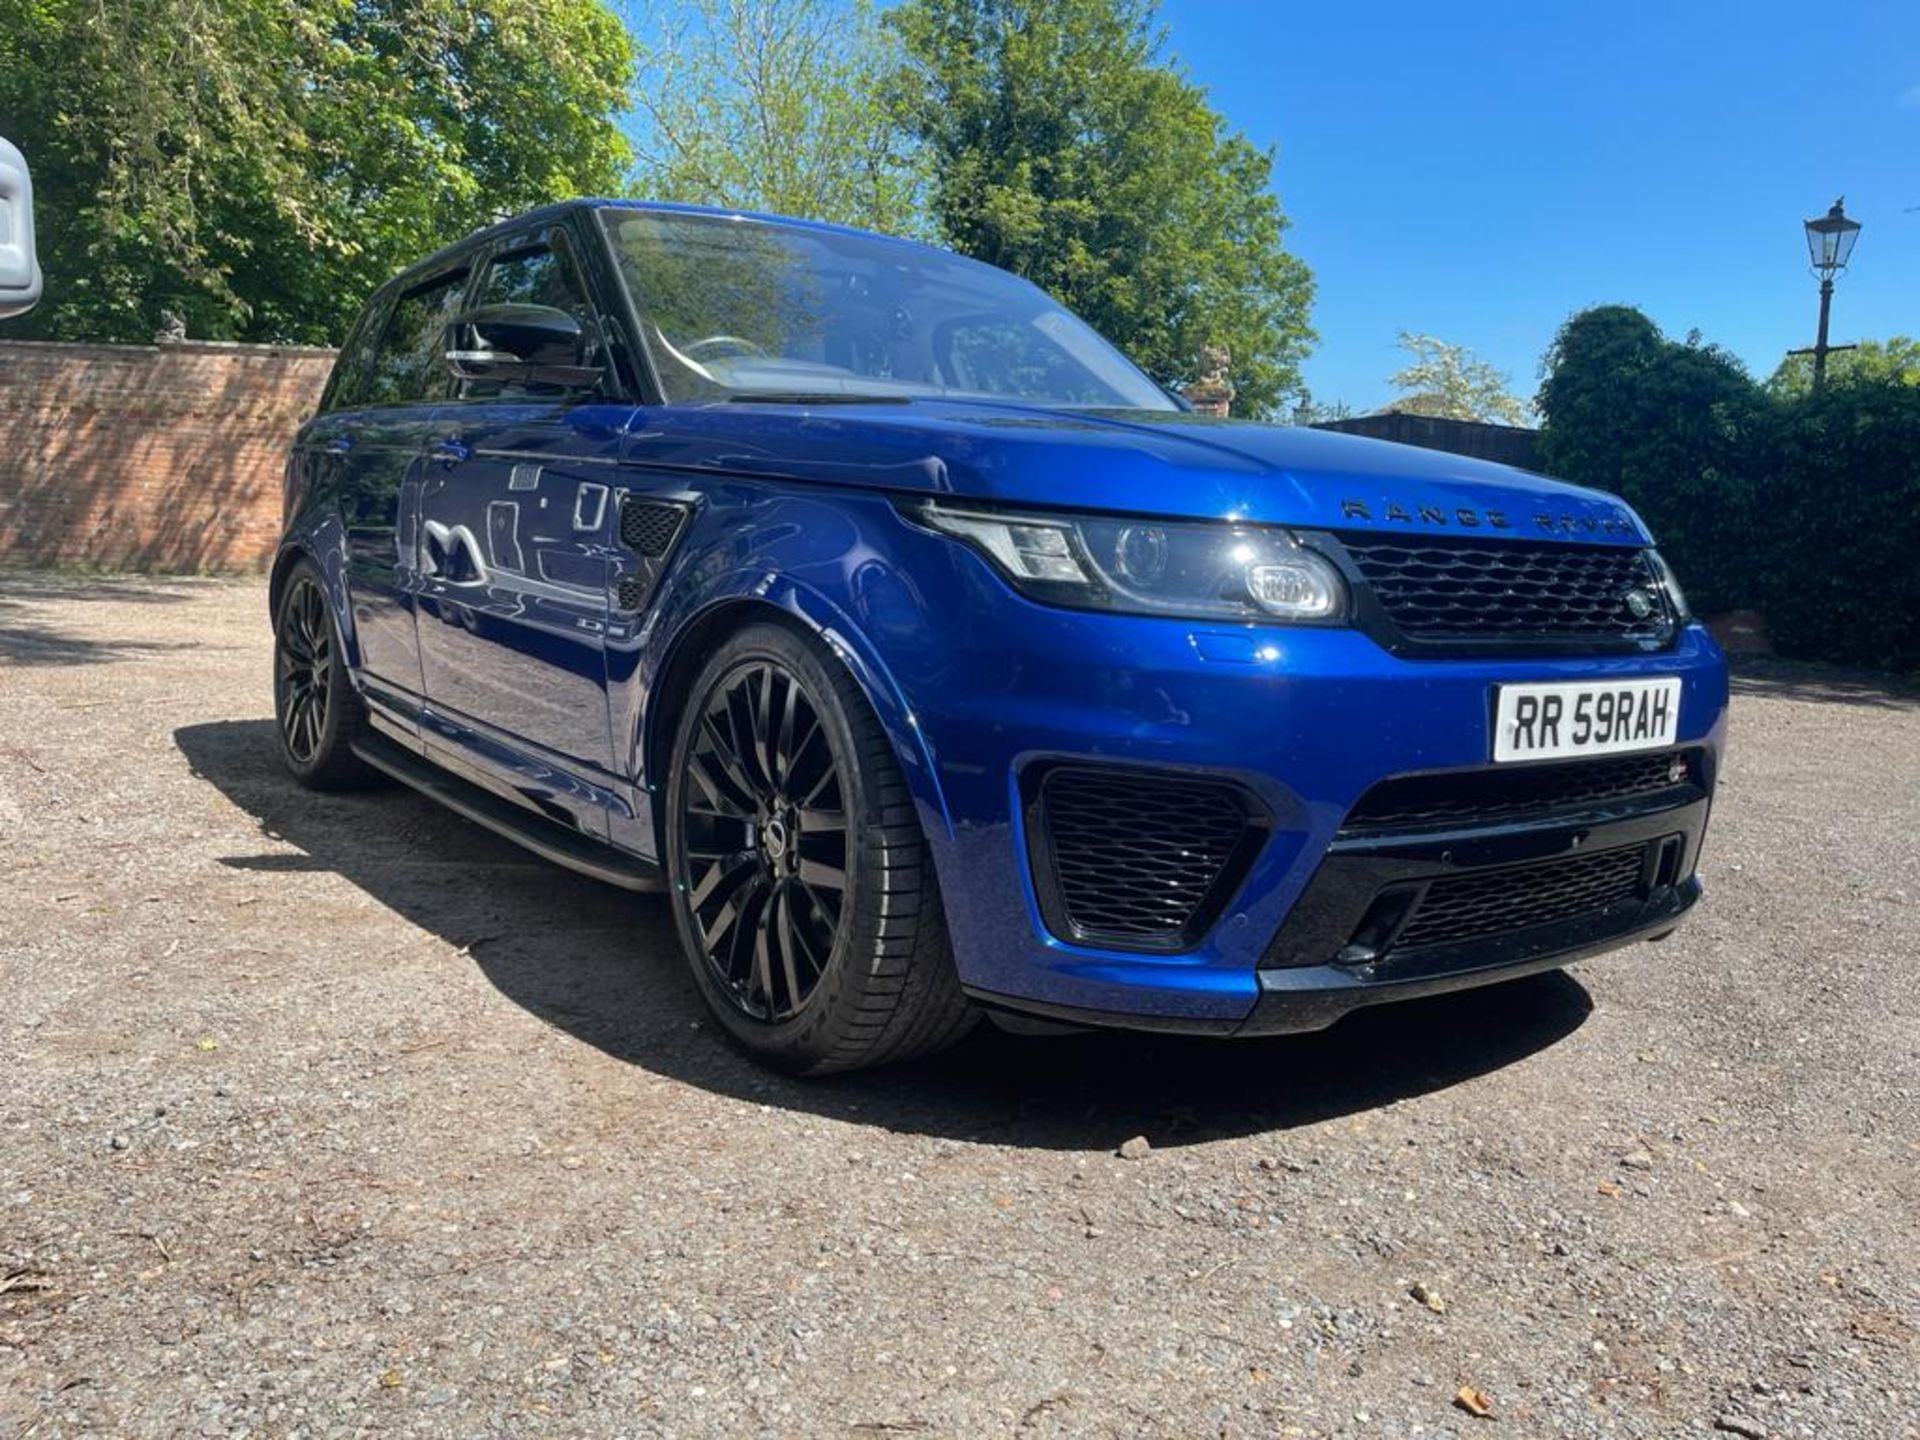 2016 RANGE ROVER SPORT SVR AUTOBIOGRAPHY DYNAMIC V8 SUPERCHARGED AUTOMATIC 5.0 550PS PETROL ENGINE - Image 5 of 28